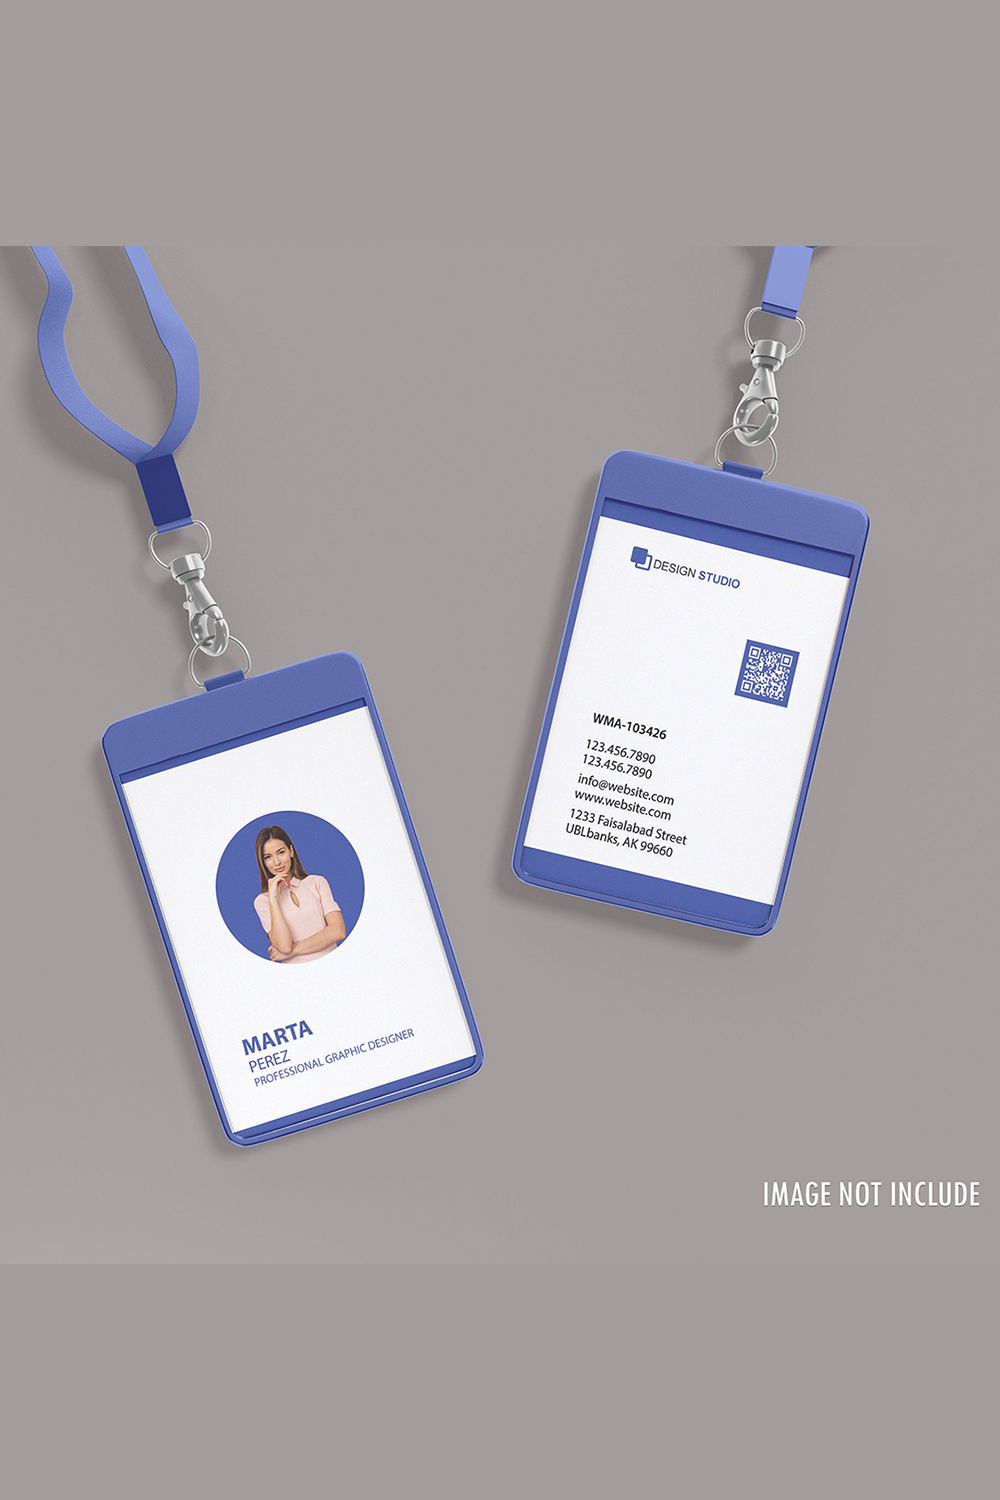 Modern and Clean Professional Business Identity Card Template Pinterest image.